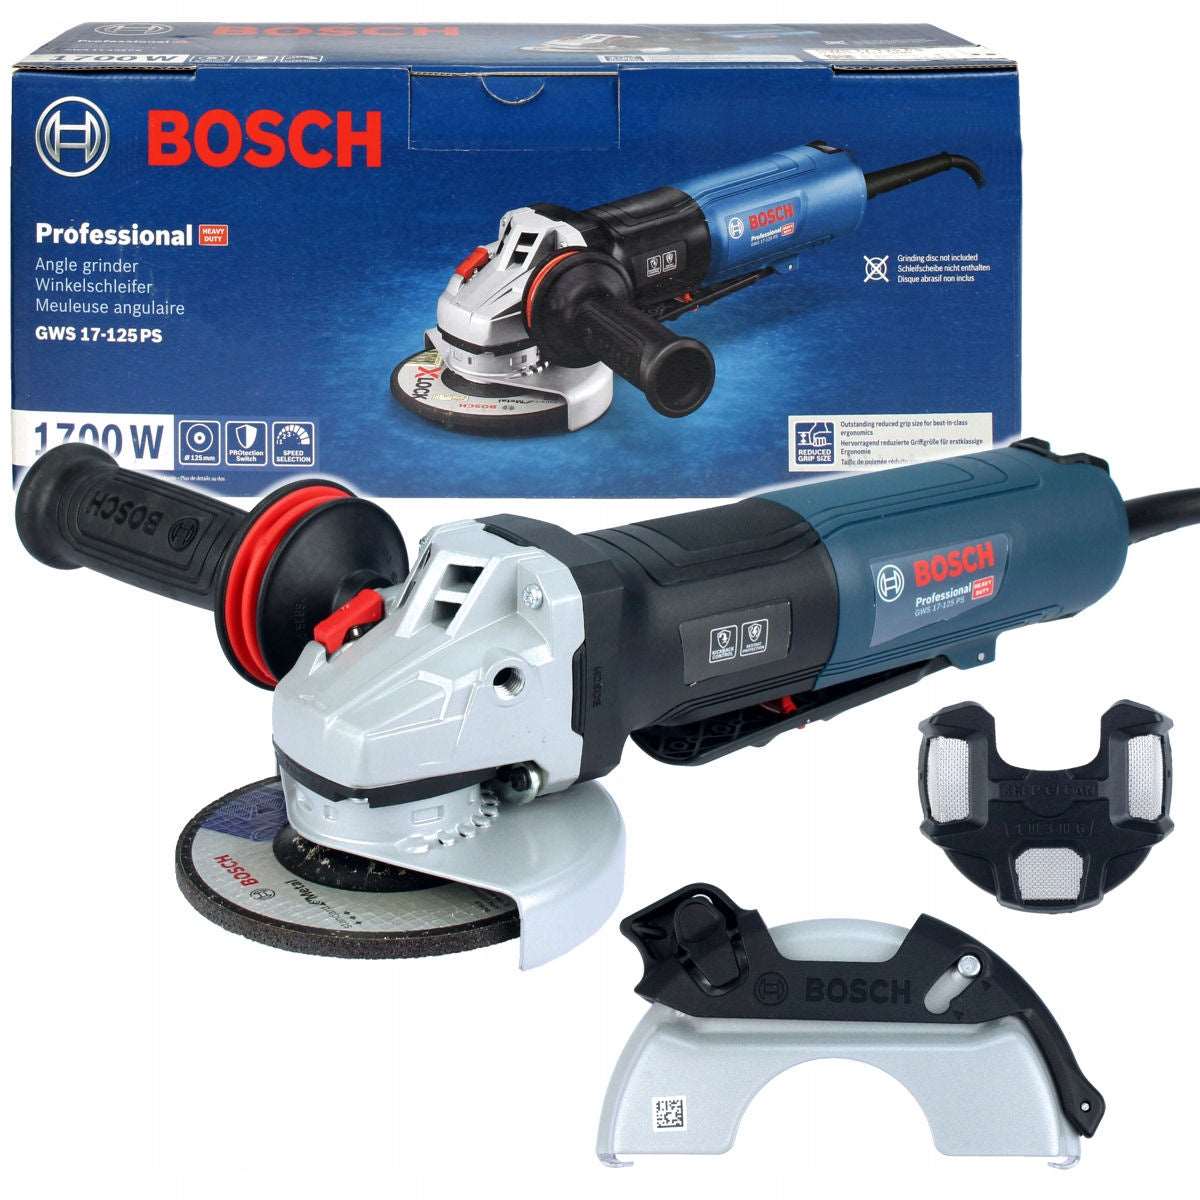 Bosch Professional Angle Grinder GWS 17-125 PS 06017D1300 Power Tool Services